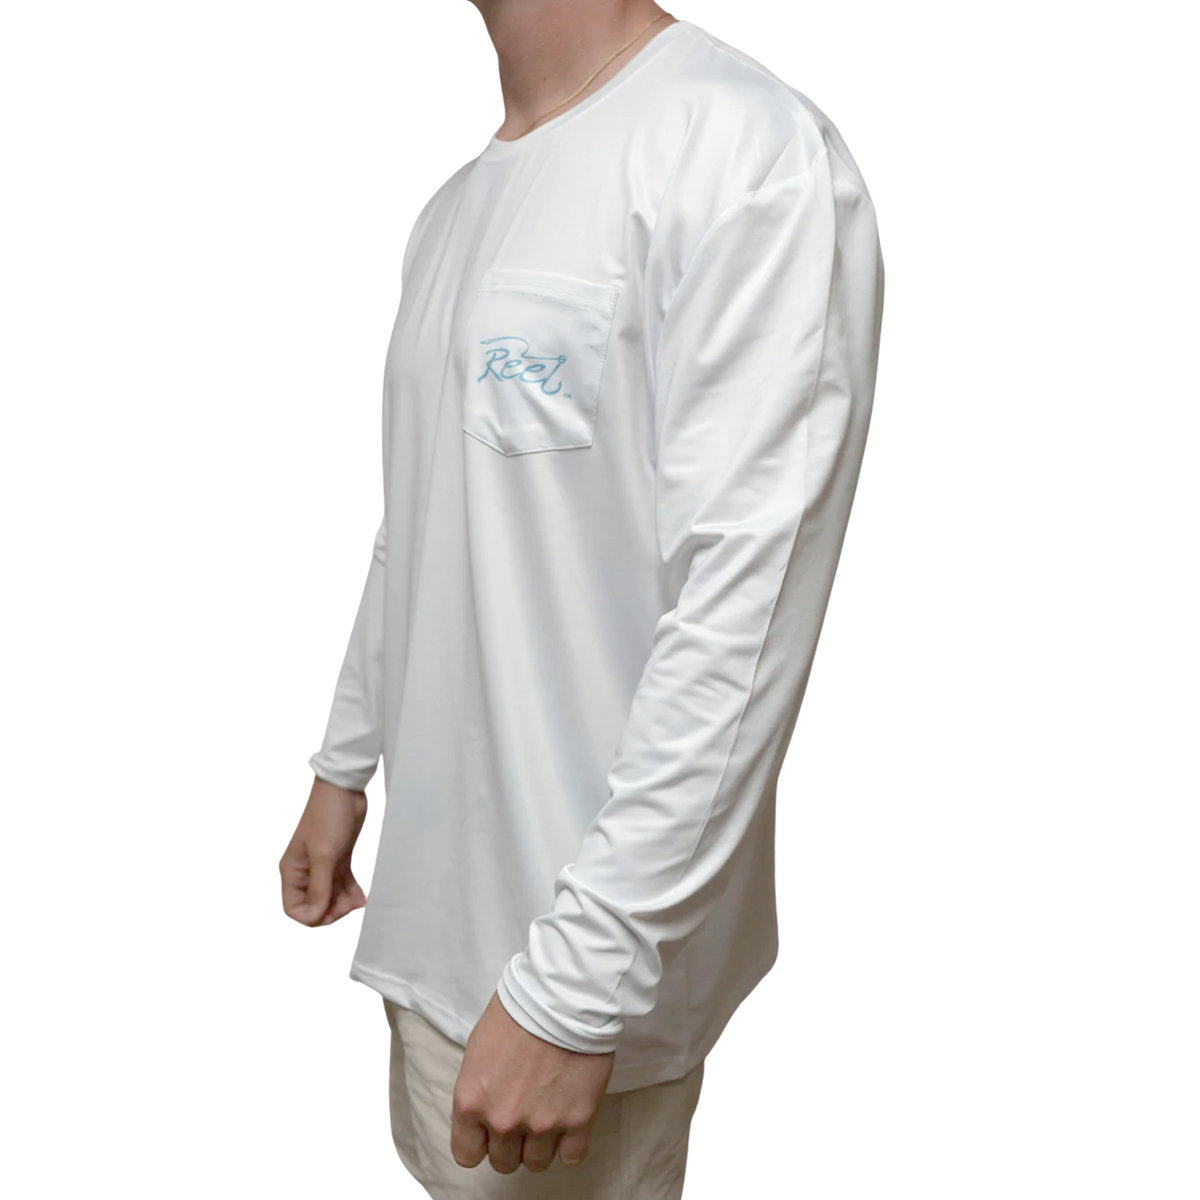 Reel White Performance Long Sleeve T-Shirt with Diamond Label